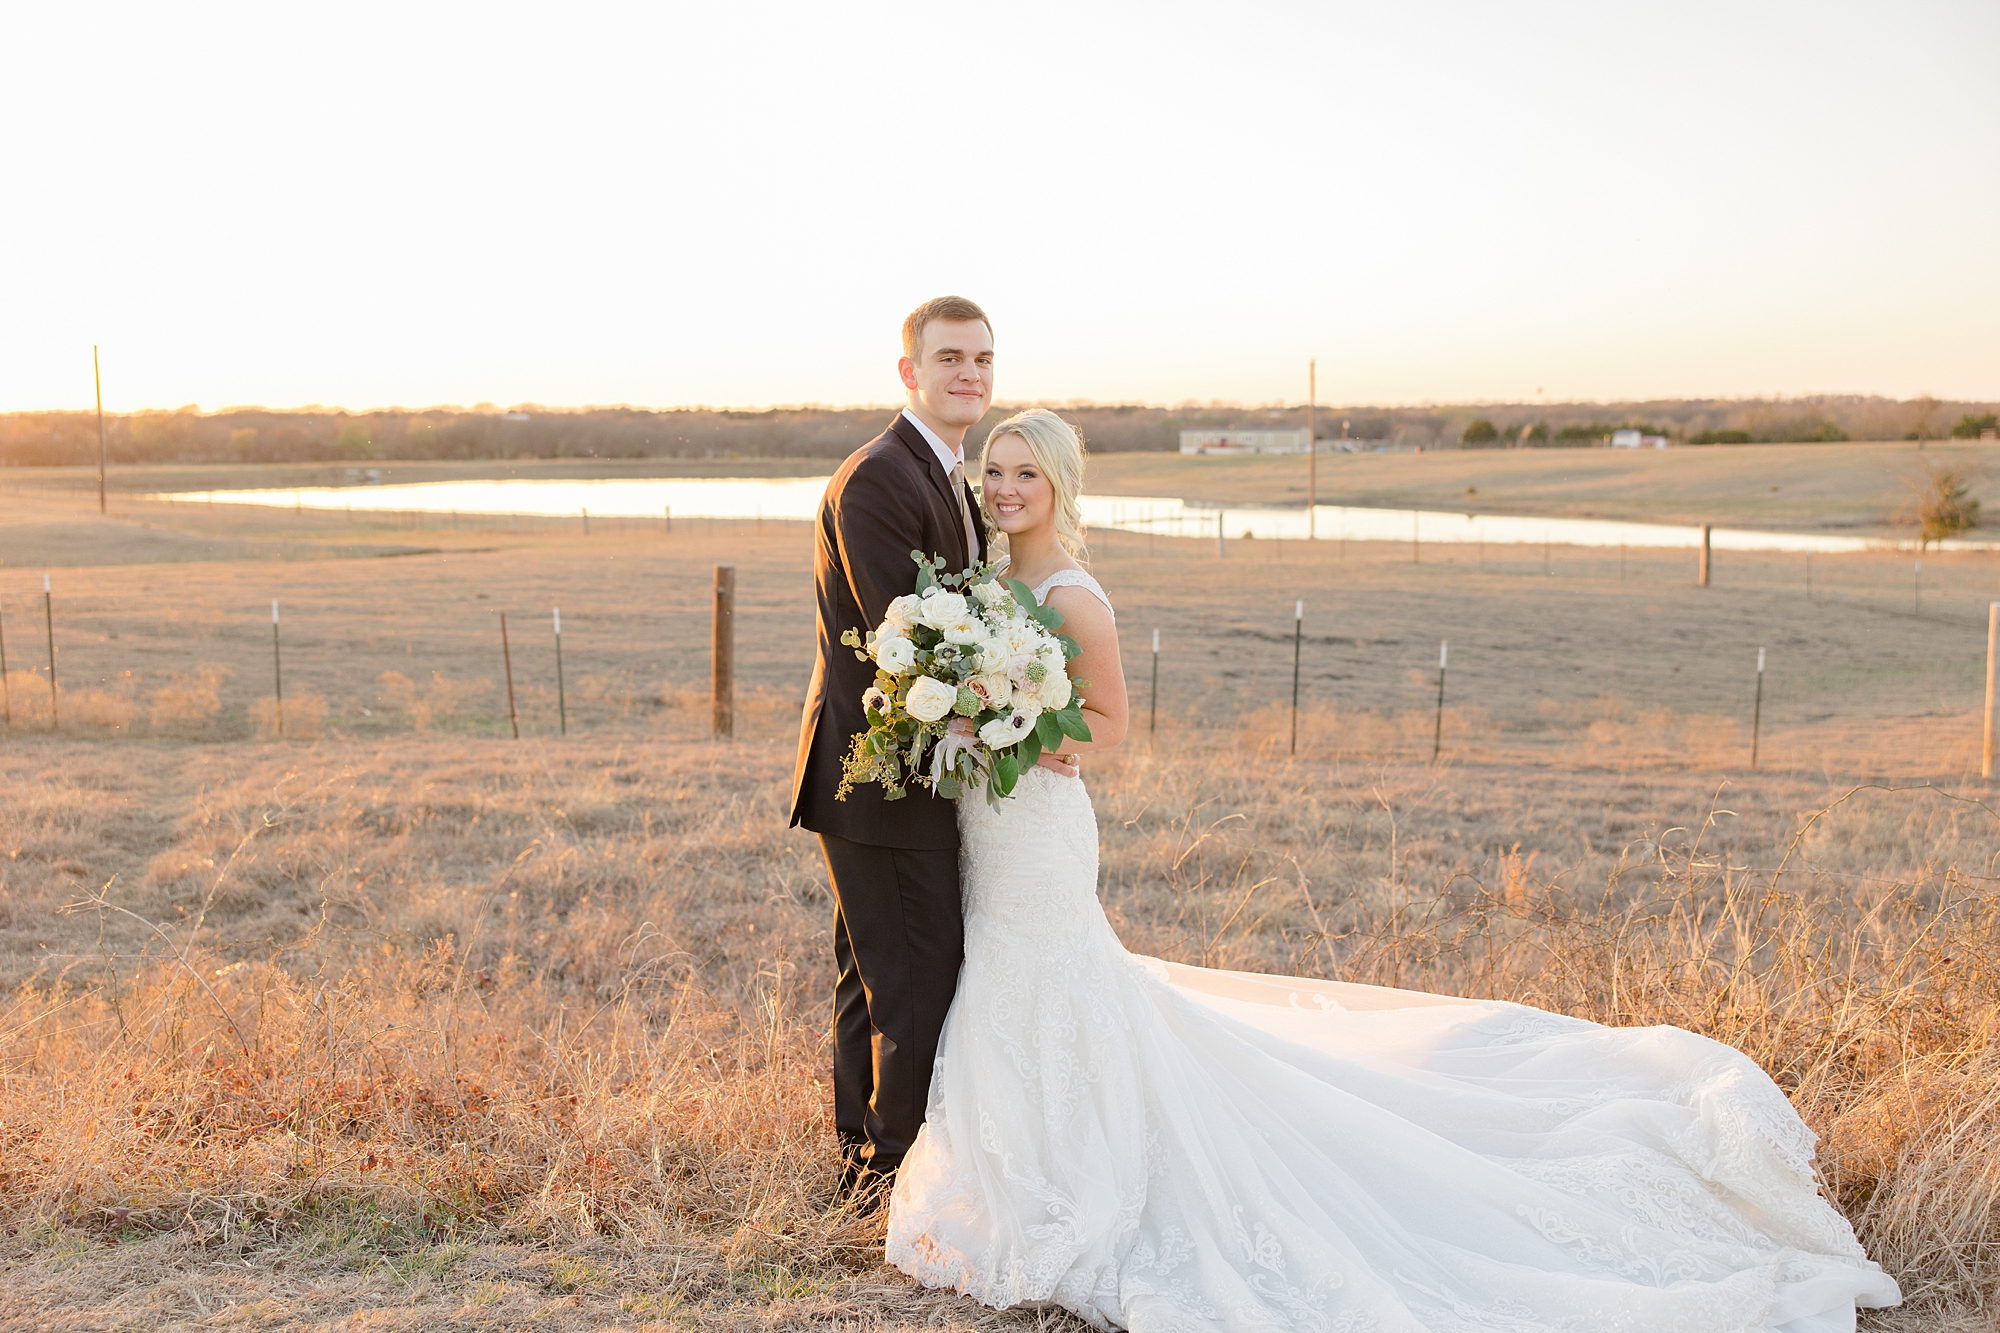 bride and groom hug in field at sunset during TX wedding day